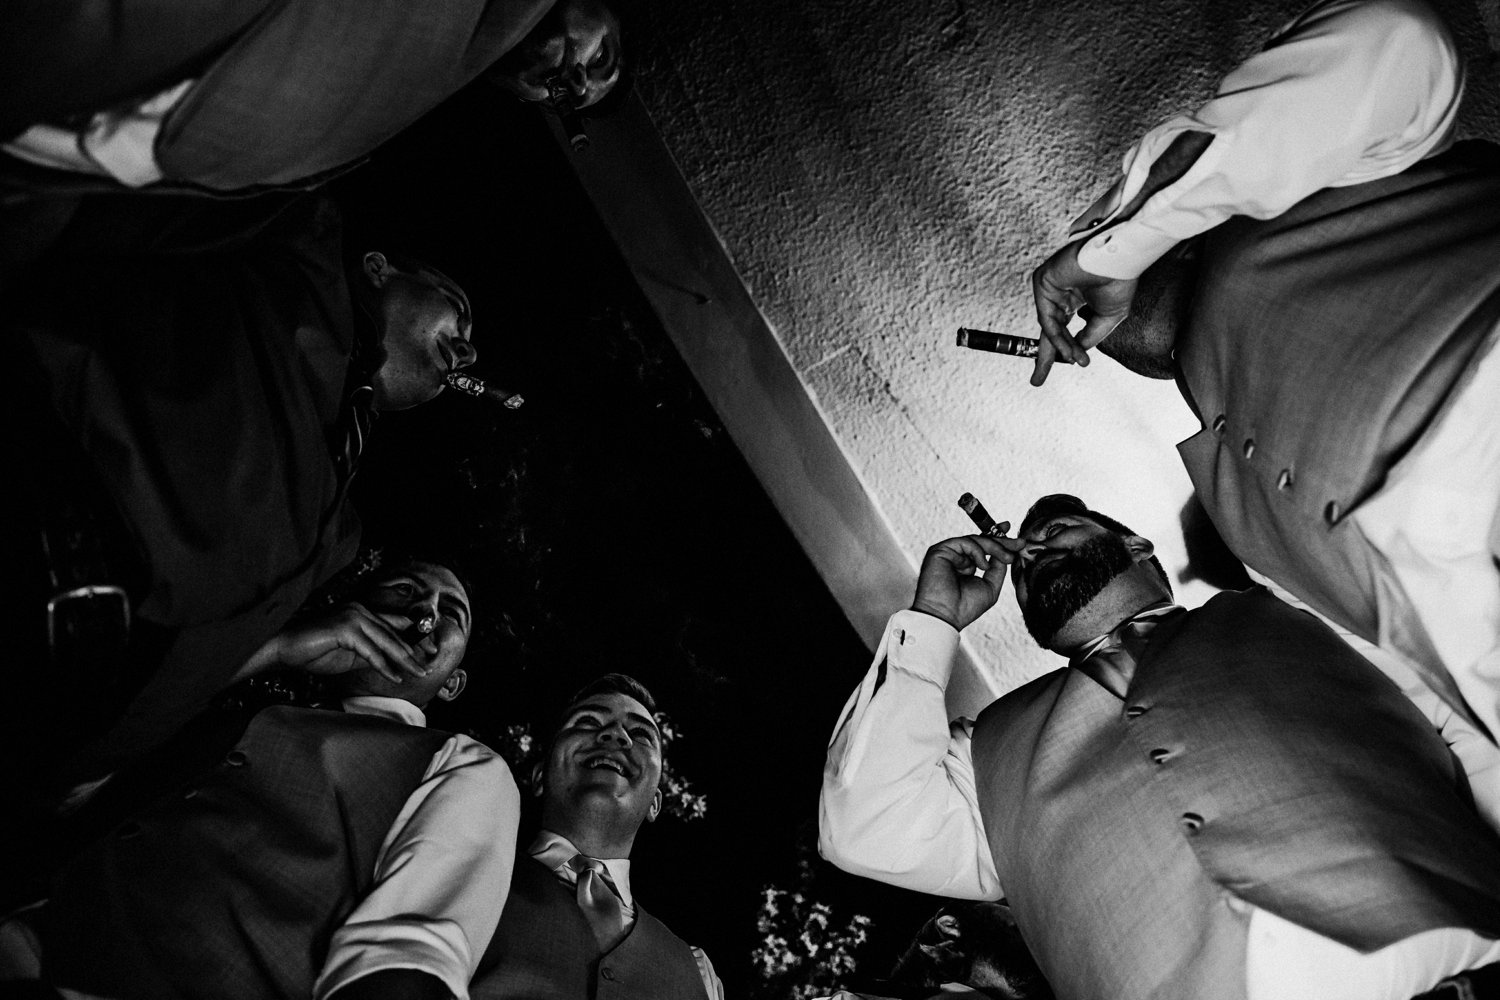  images by feliciathephotographer.com | destination wedding photographer | spring time | carriage club | exclusive | reception | cigars | groomsmen | bonding | contrast | black and white | 